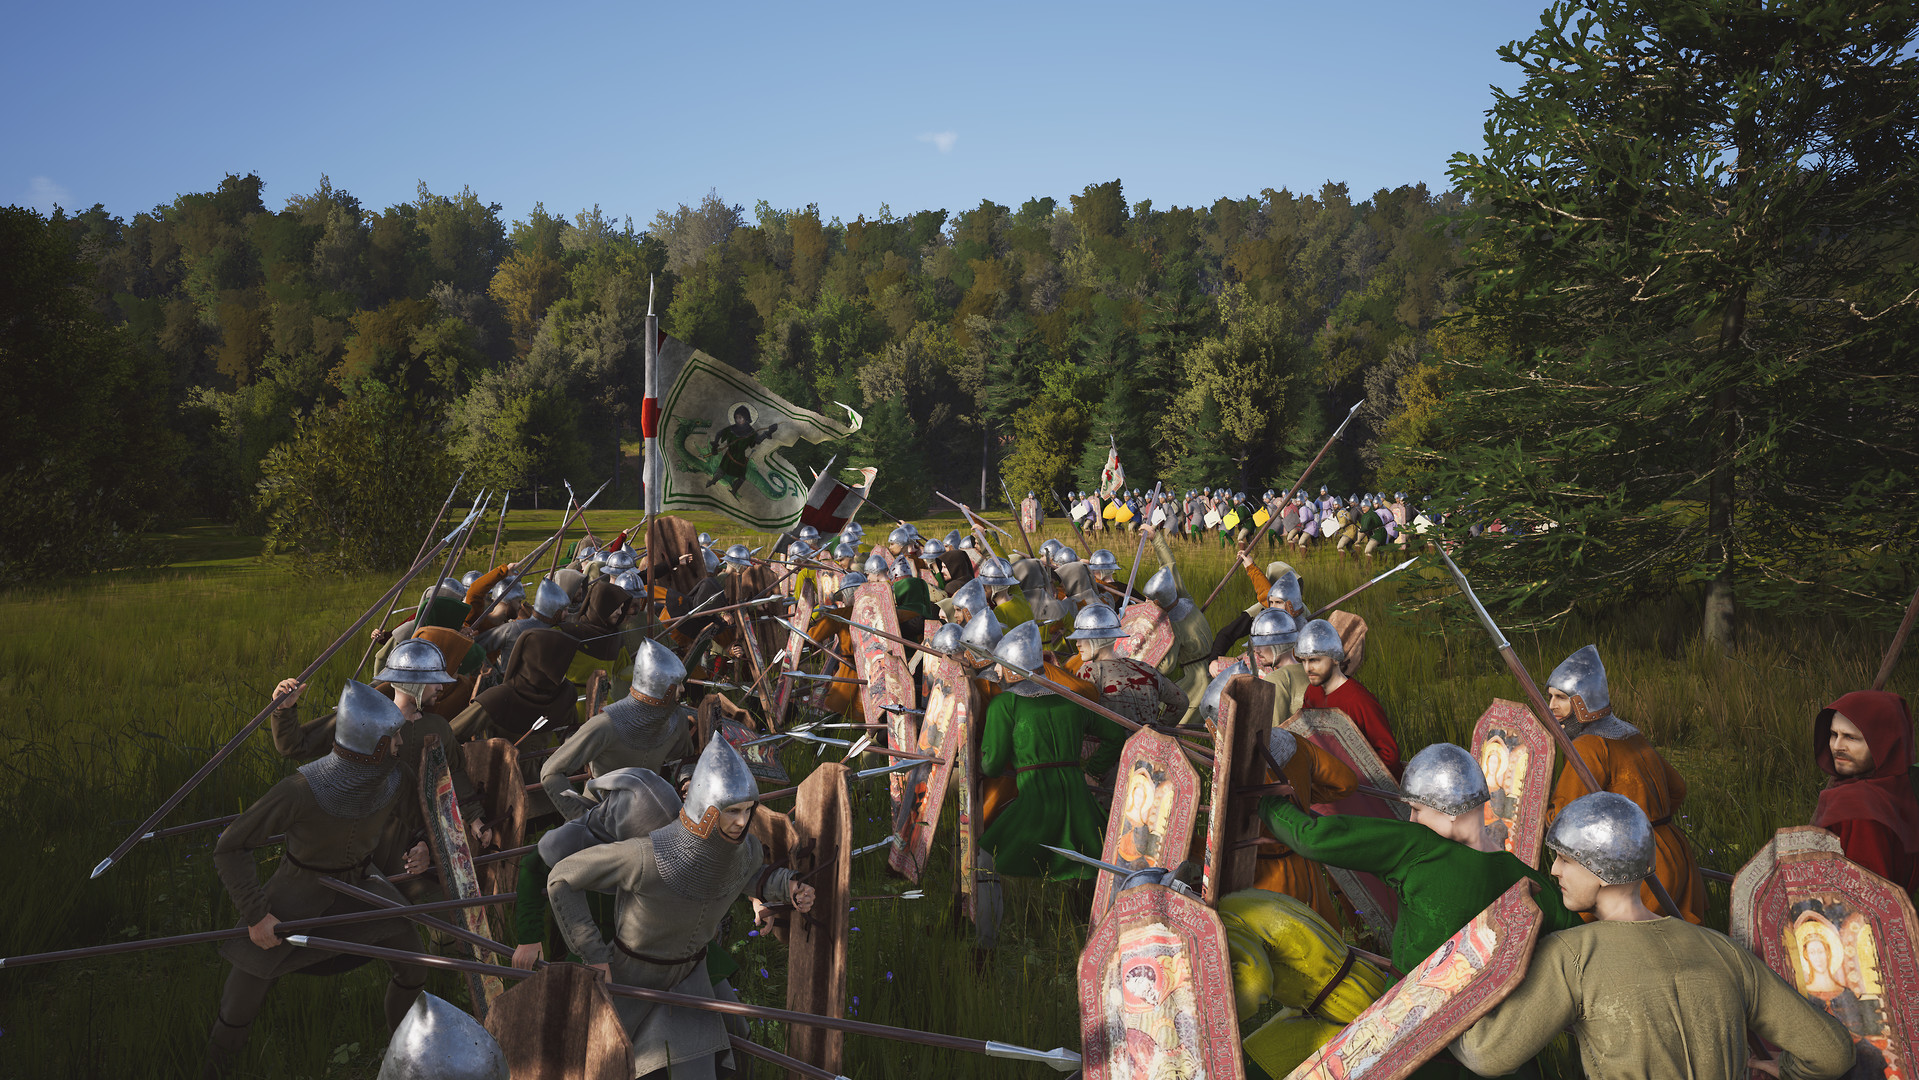 Manor Lords is Total War, Crusader Kings and Age of Empires in a